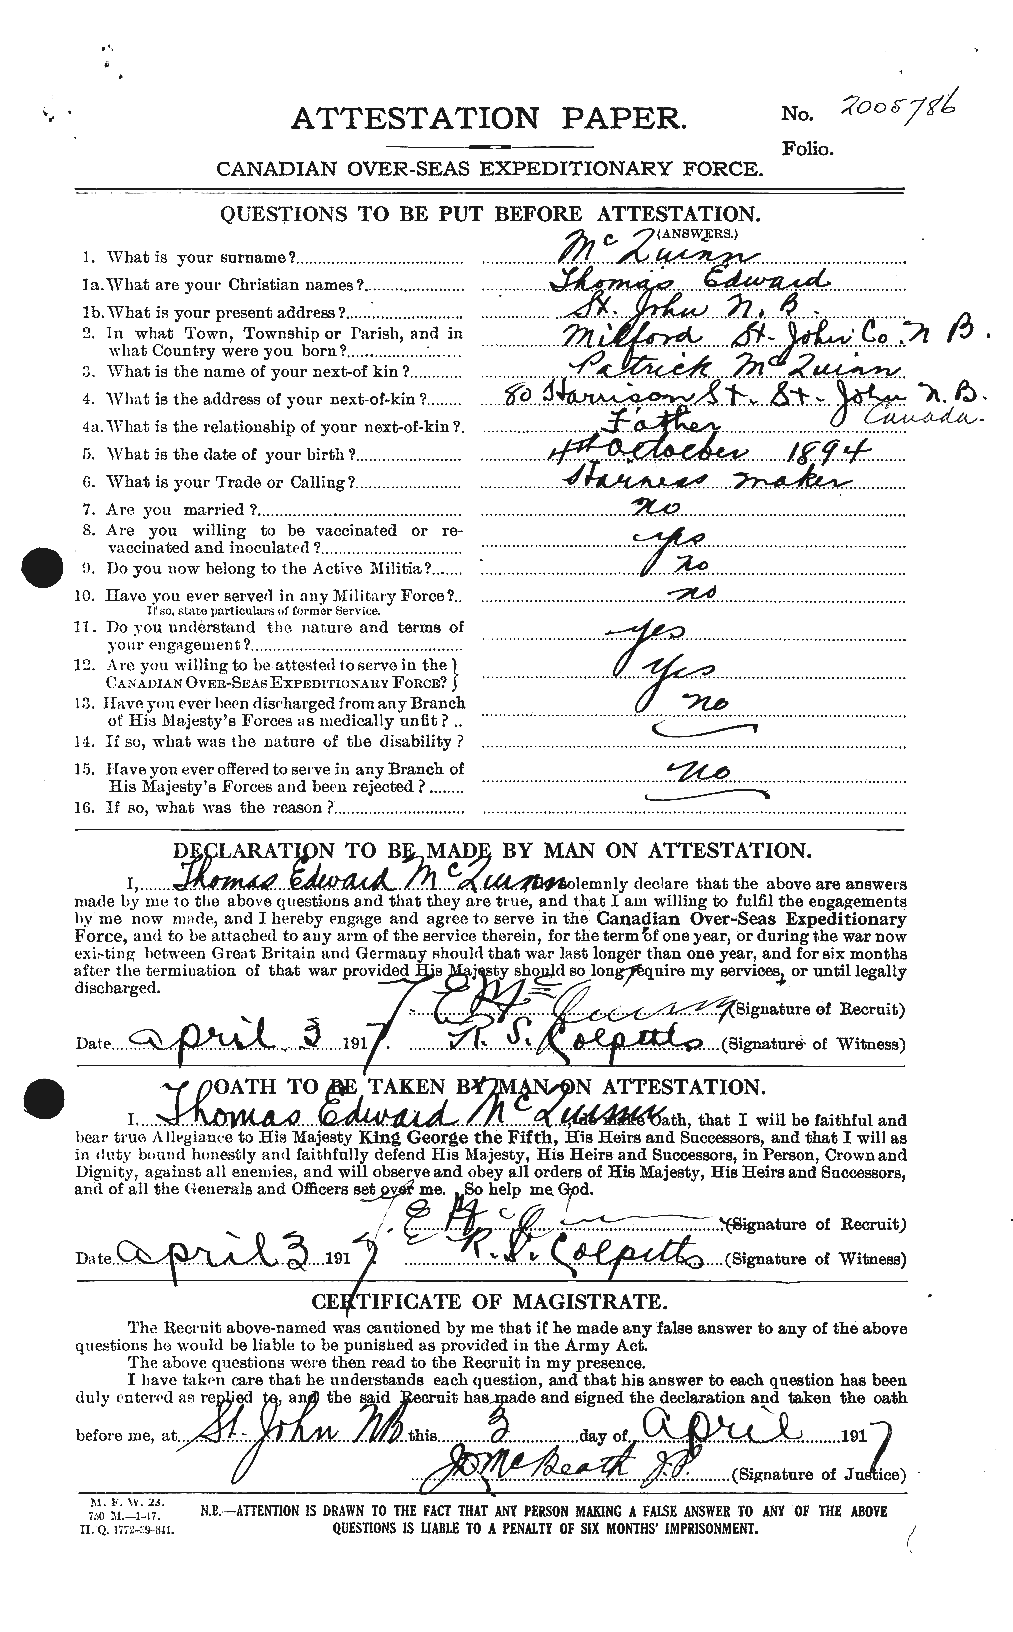 Personnel Records of the First World War - CEF 546051a